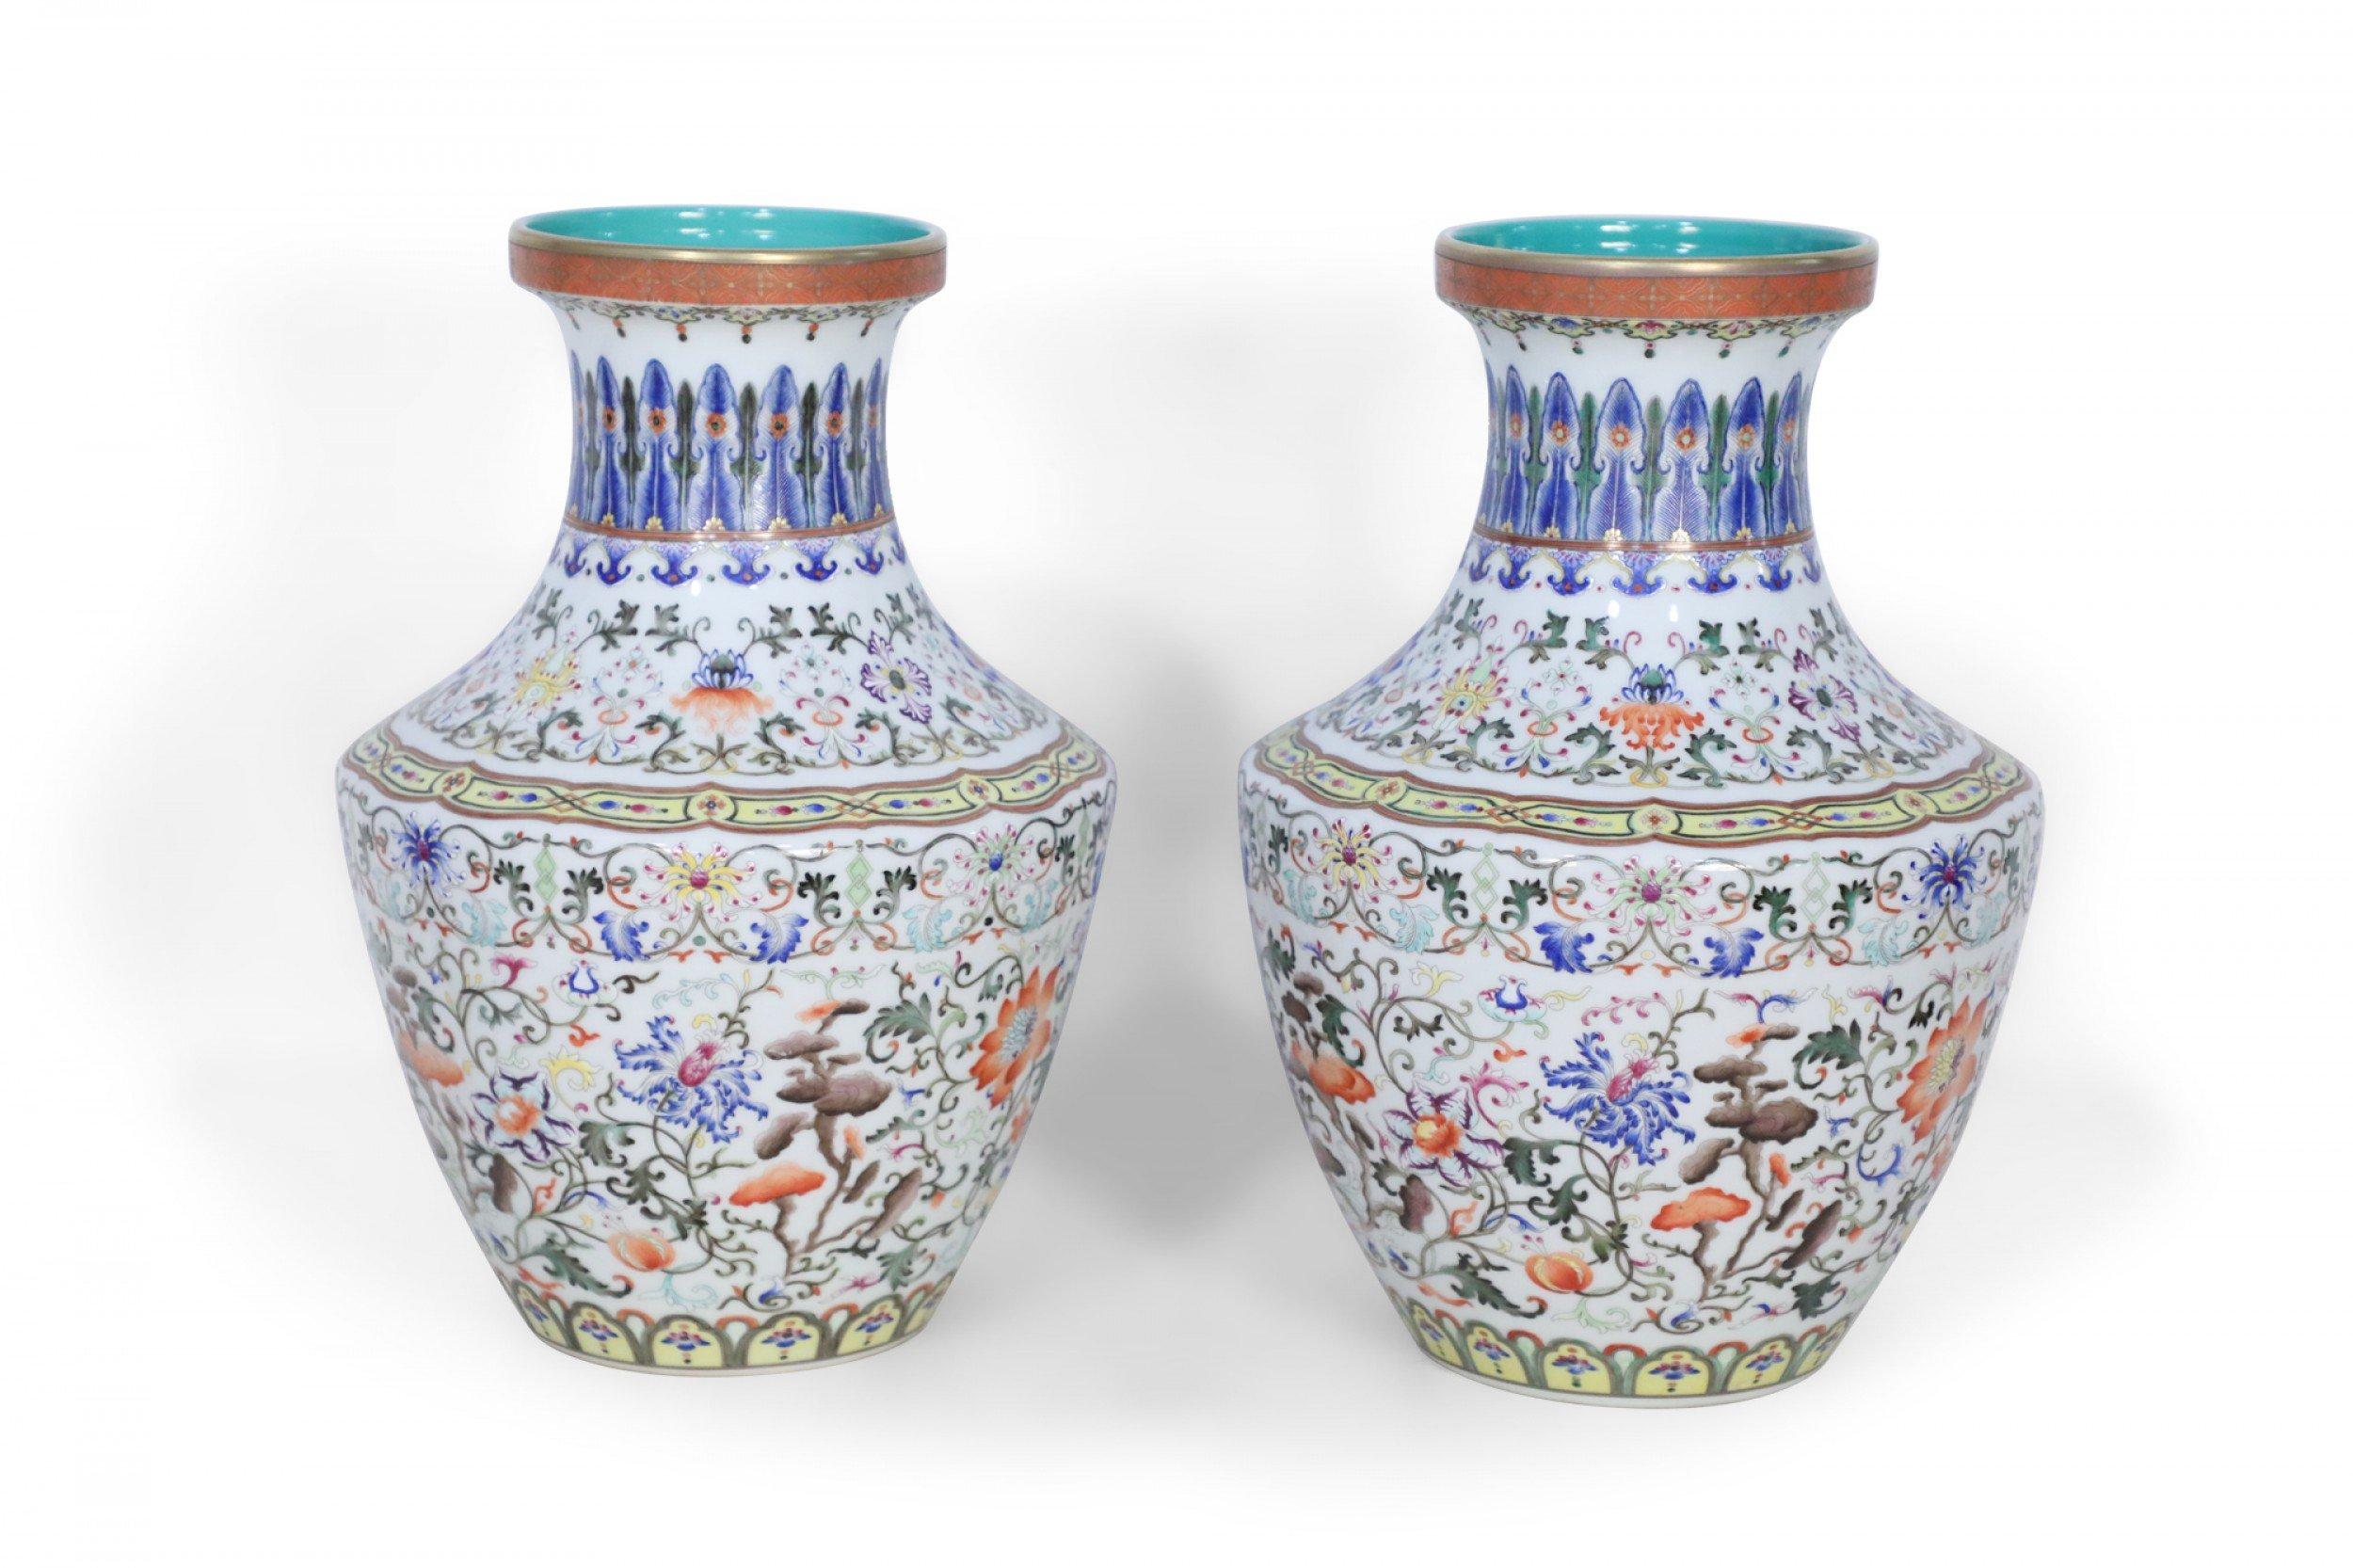 Pair of Chinese vases decorated with all-over swirling floral motifs intercepted by yellow patterned bands at the bottom and top of the base and striking blue designs wrapping concaved necks, and turquoise blue interiors (priced as pair).
    